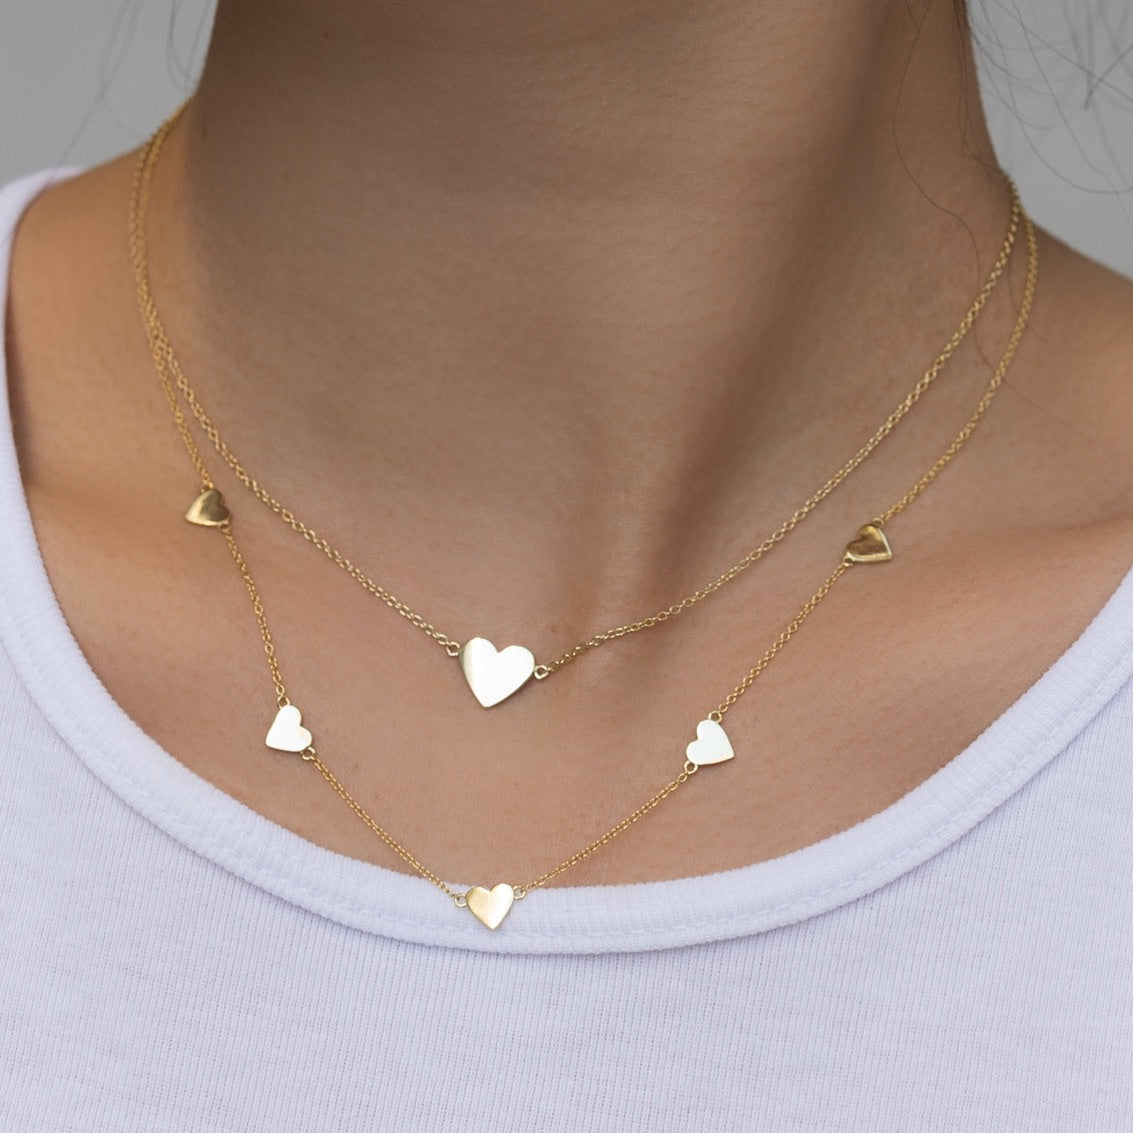 Five Heart Love Necklace